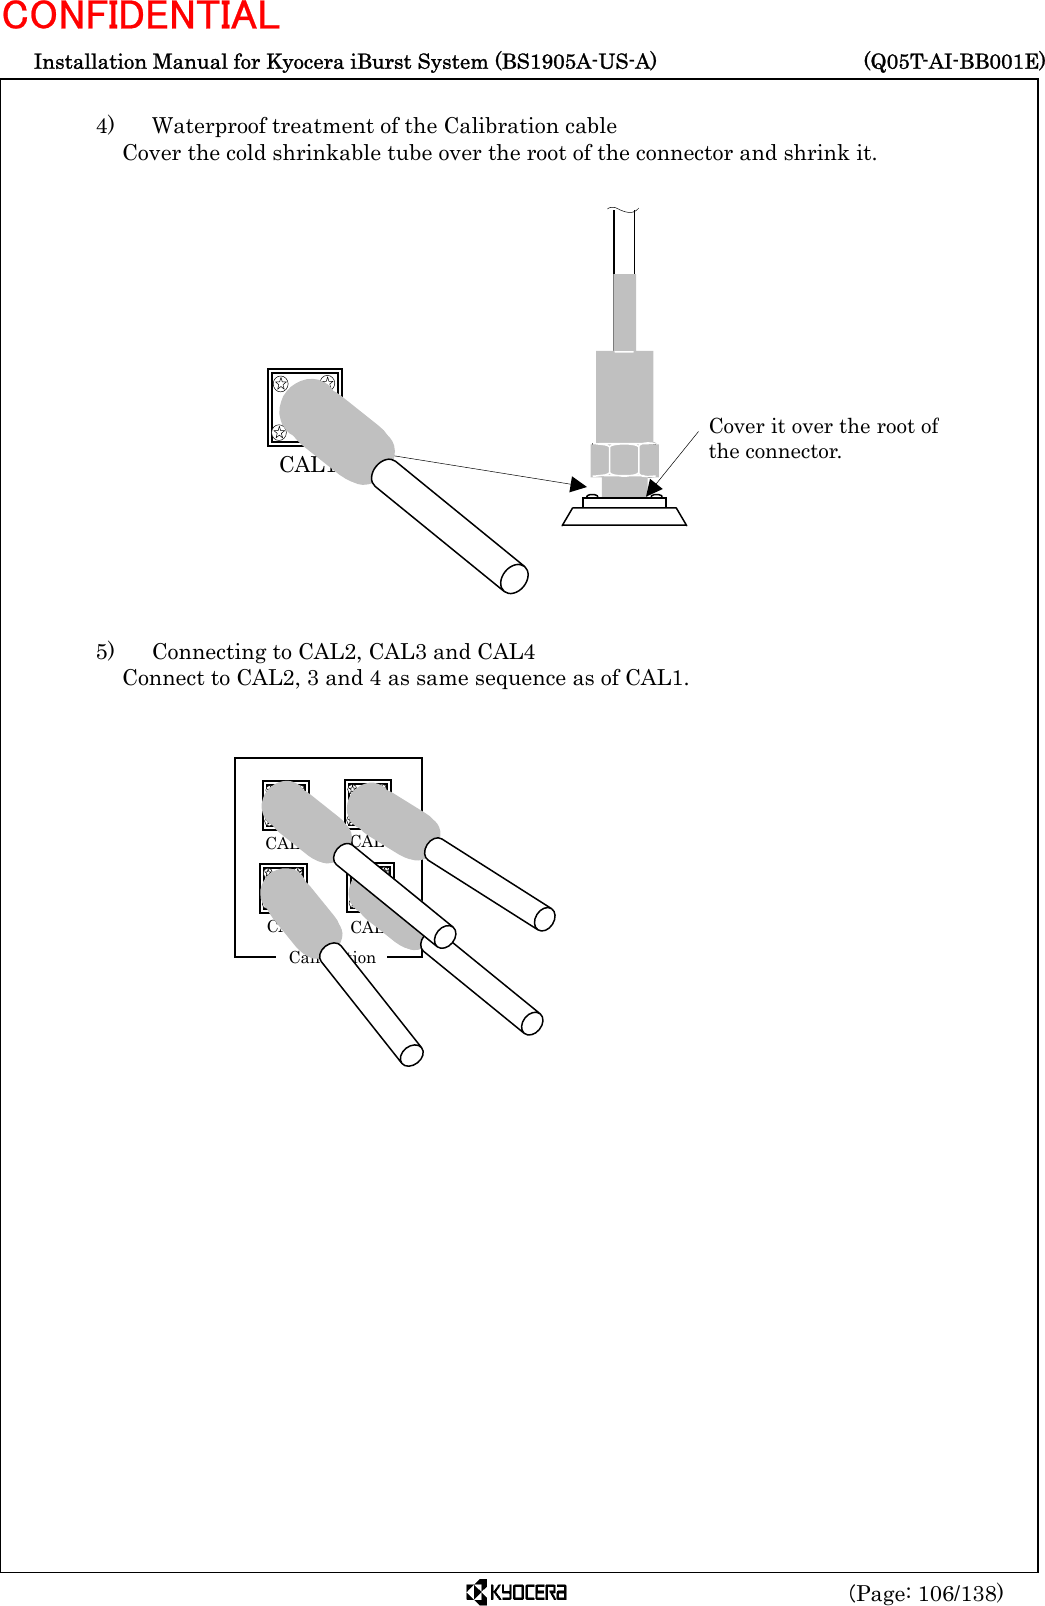  Installation Manual for Kyocera iBurst System (BS1905A-US-A)     (Q05T-AI-BB001E) (Page: 106/138) CONFIDENTIAL  4)    Waterproof treatment of the Calibration cable   Cover the cold shrinkable tube over the root of the connector and shrink it.                   5)    Connecting to CAL2, CAL3 and CAL4 Connect to CAL2, 3 and 4 as same sequence as of CAL1.   CAL1 Cover it over the root ofthe connector.  CAL1 CAL CAL3 CAL4   Calibration 